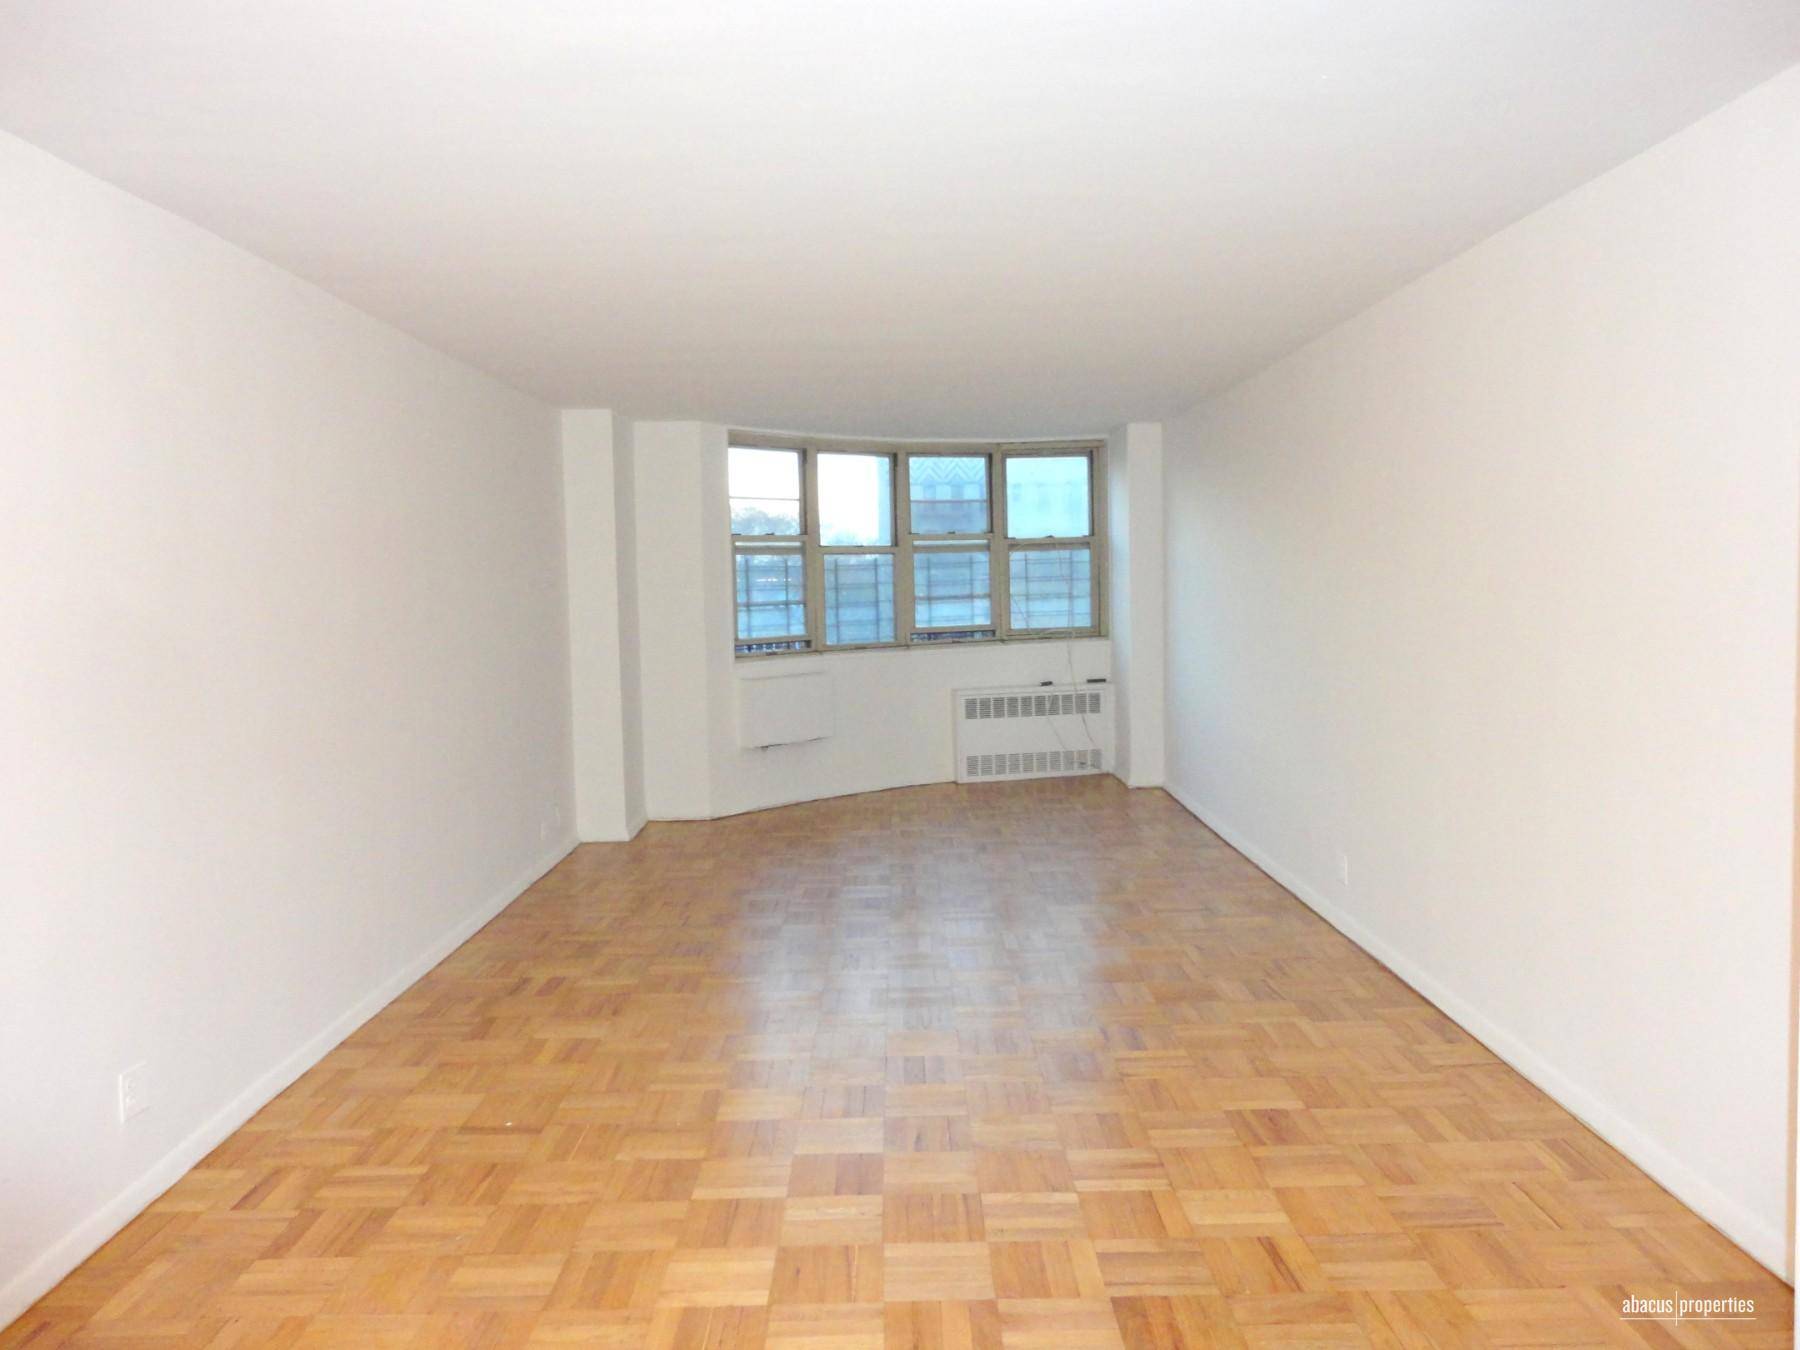 This 2 bedroom with 2 bathroom apartment is located on the 5th floor and features spectacular unobstructed sunset views.